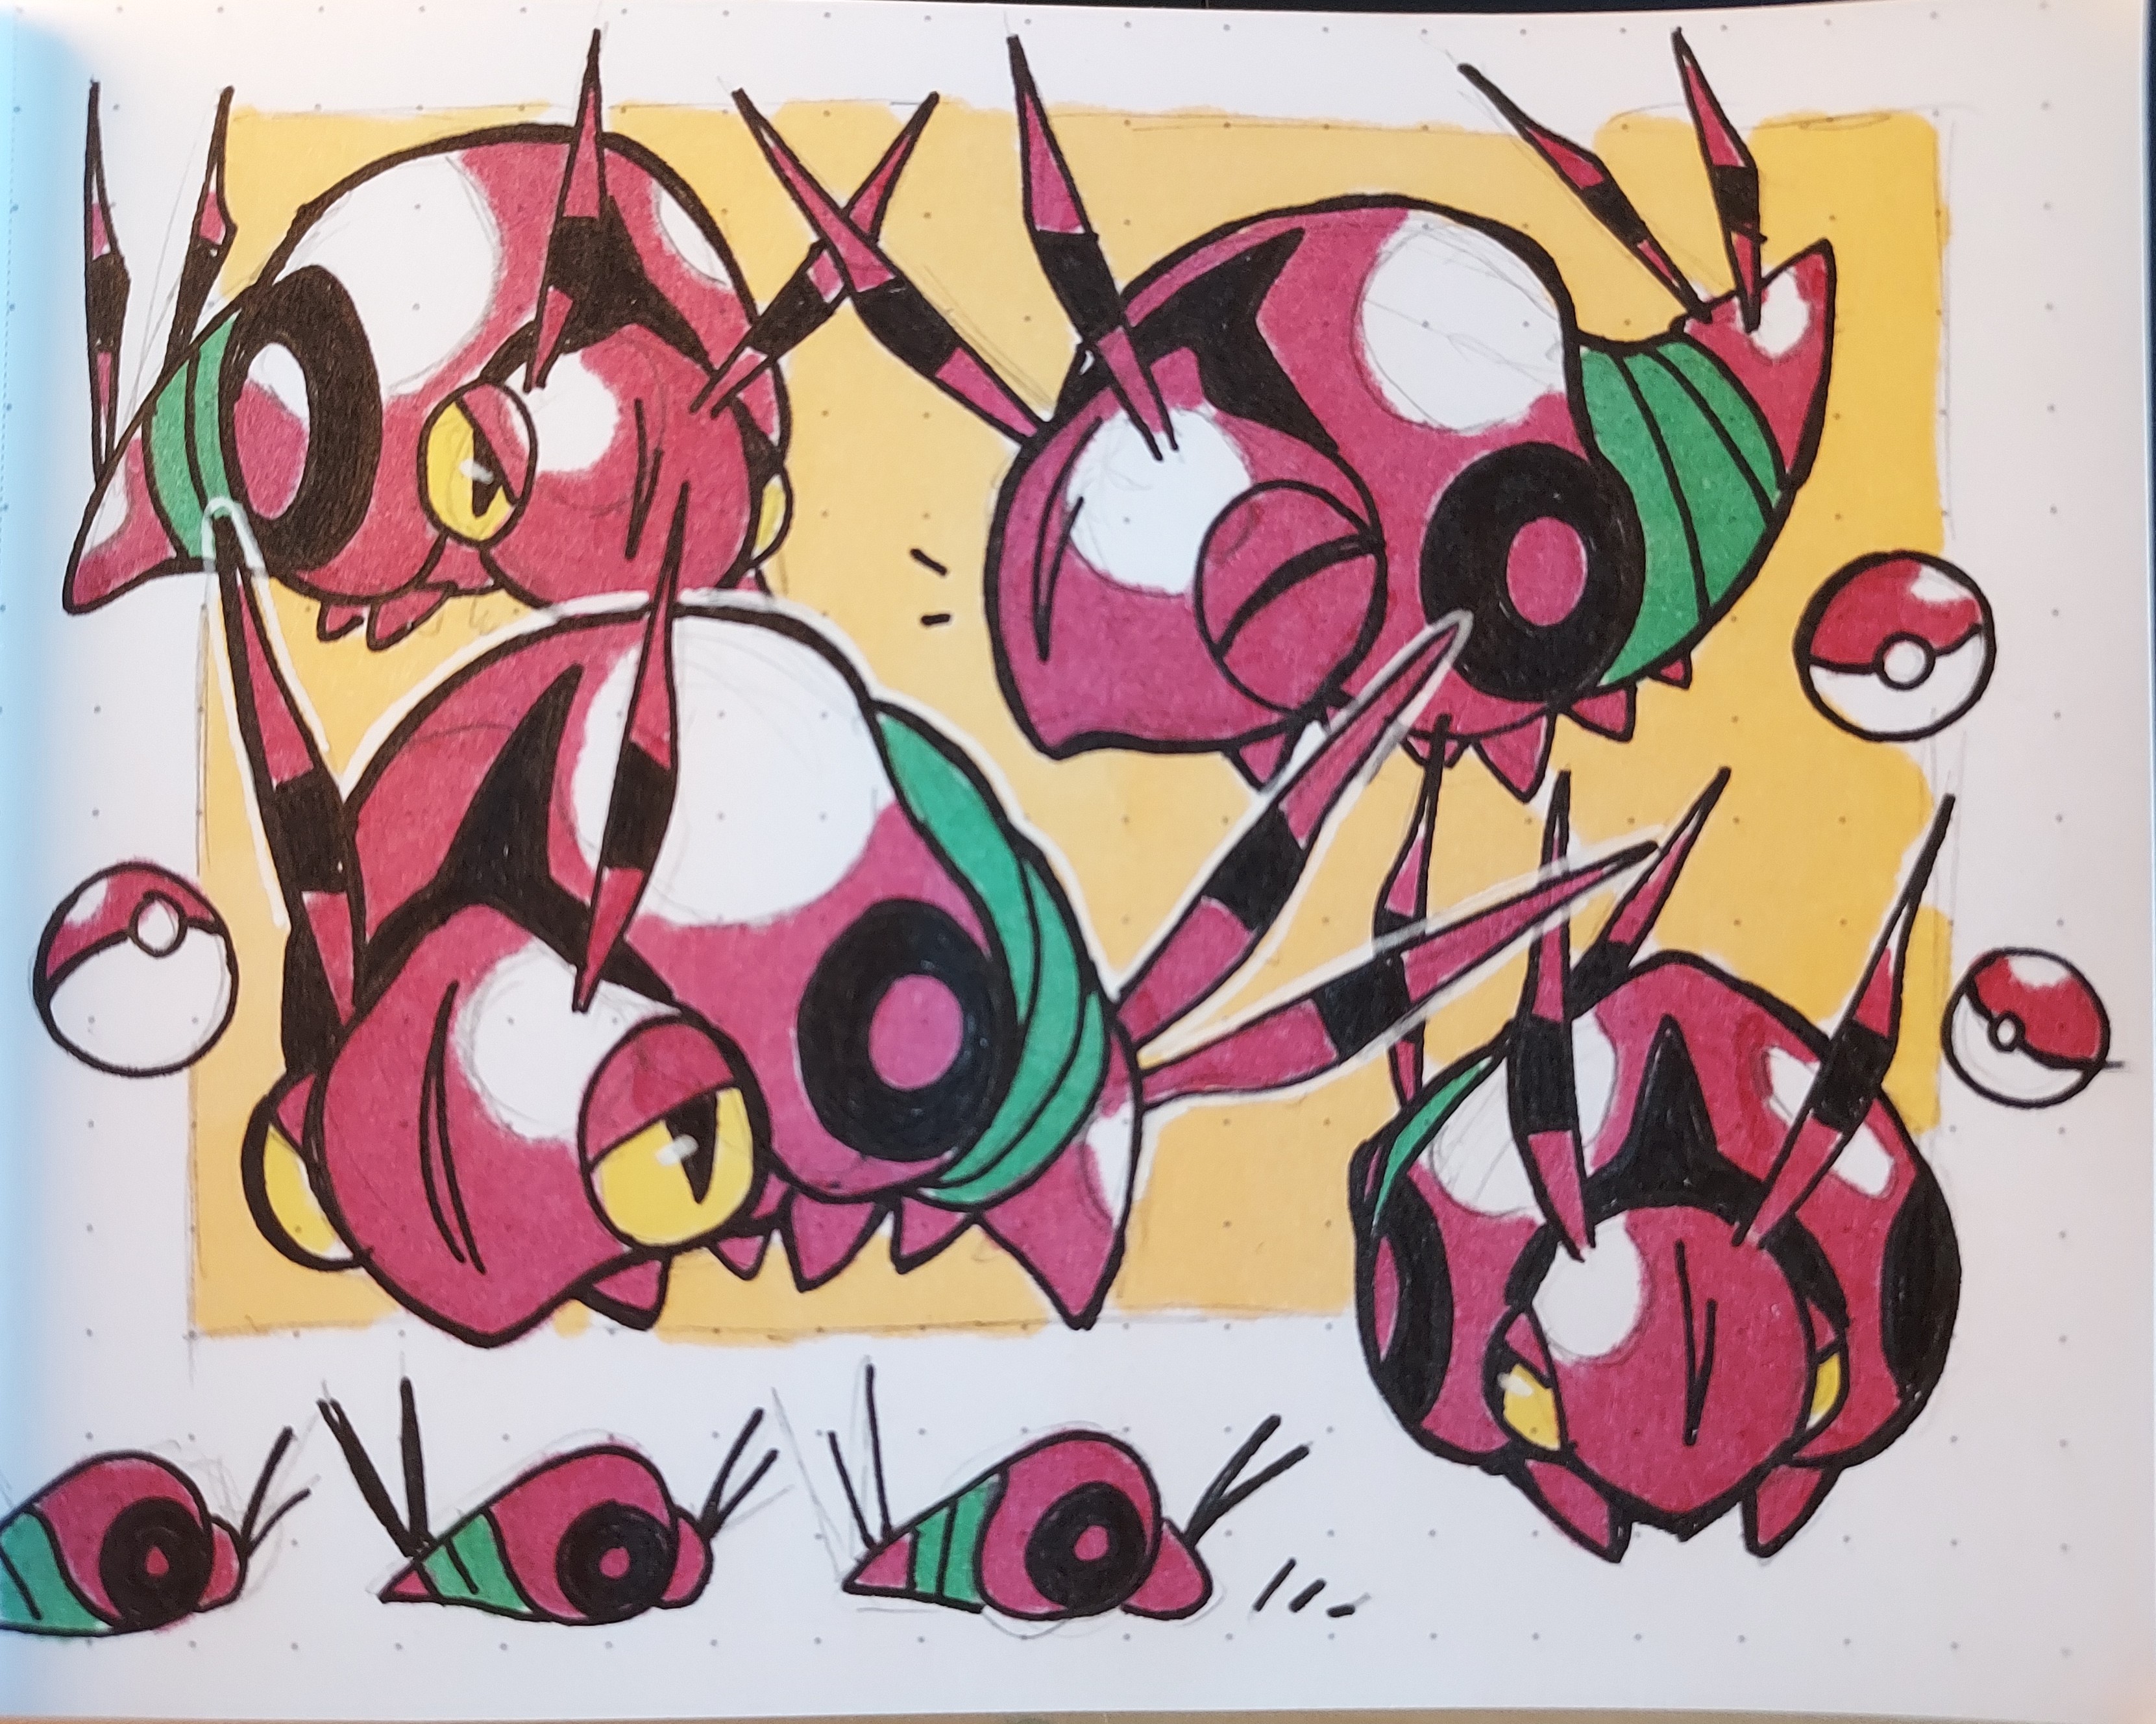 Page 5: Four pen drawings of Venipede from Pokemon. They sit on a yellow background. Three simplified Venipede scoot along the bottom of the page, and three pokeballs are scattered throughout.